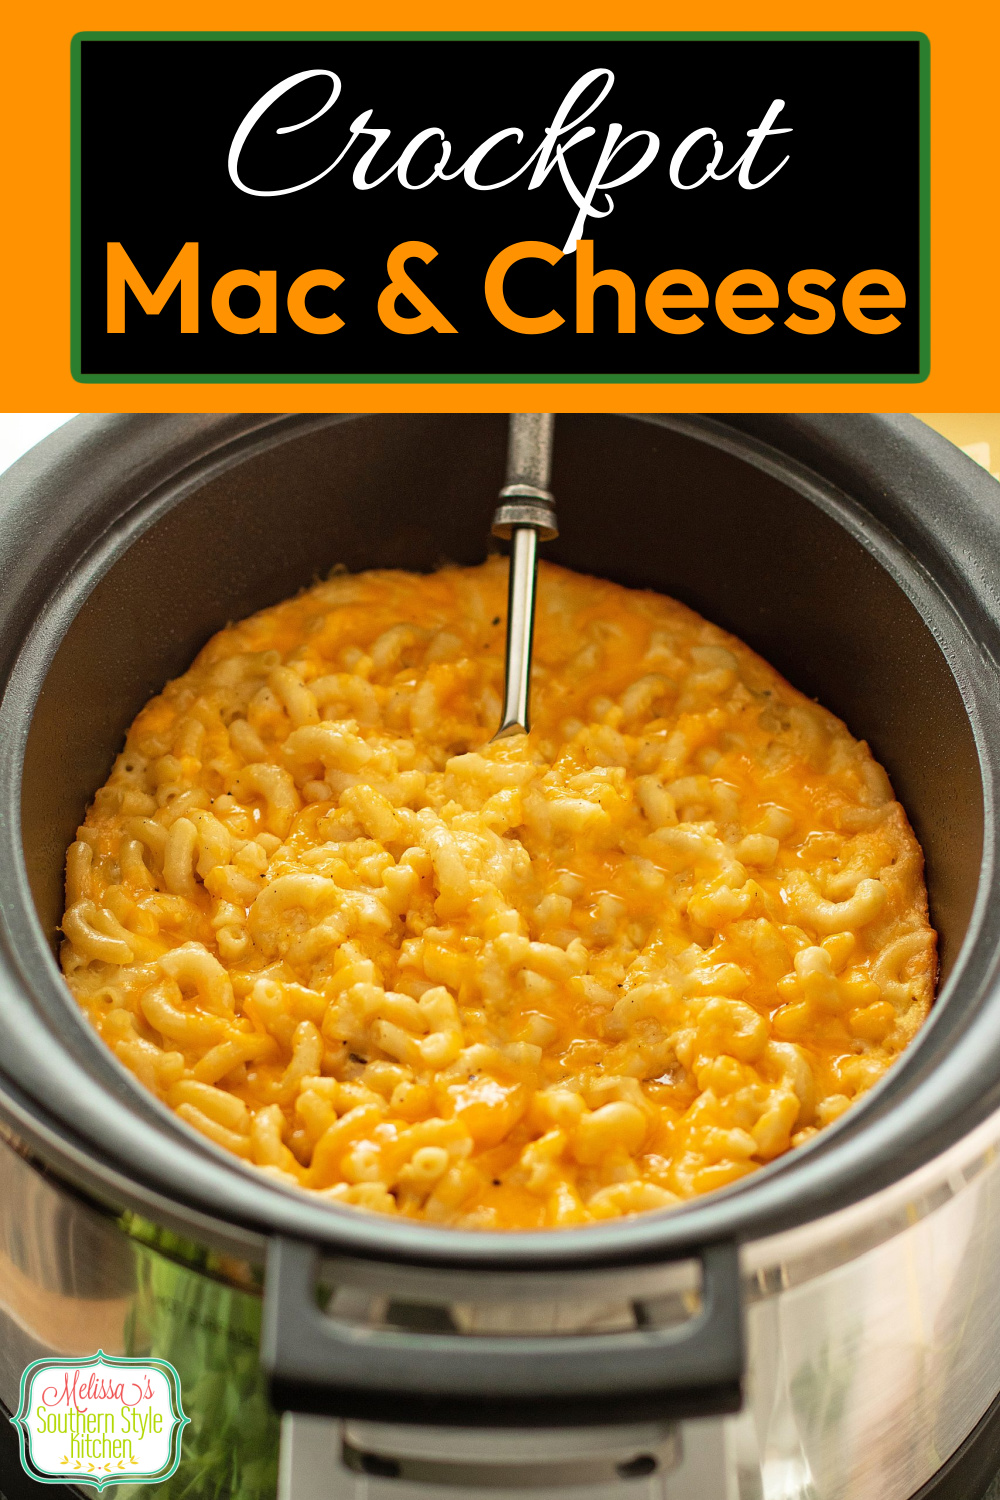 This easy Crockpot Mac and Cheese recipe features a quick sauce that's combined with elbow macaroni and a generous helping of cheddar cheese #crockpotrecipes #crockpotmacandcheese #easymacandcheese #cheesymacaroni #macaroniandcheeserecipe #slowcookermacandcheese #bestmacandcheeserecipe